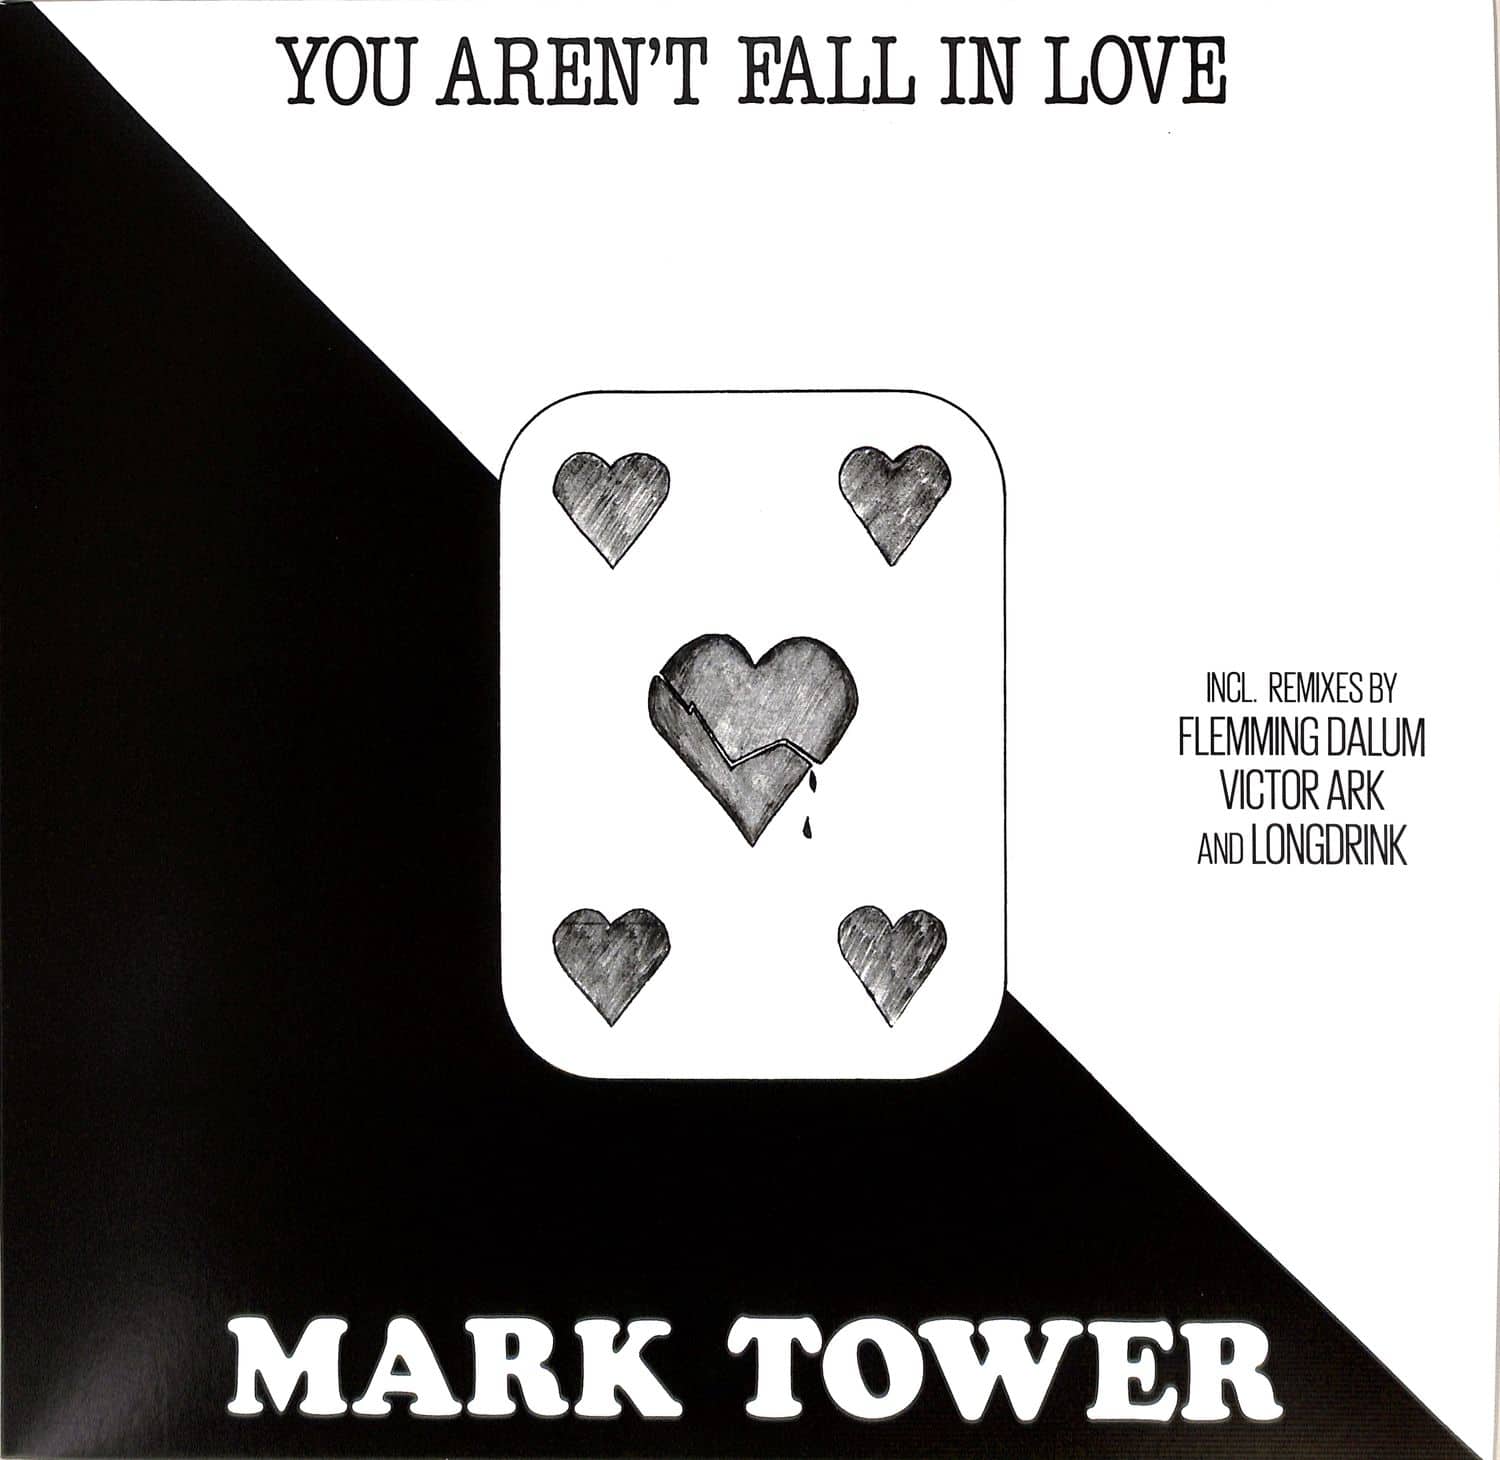 Mark Tower - YOU ARENT FALL IN LOVE